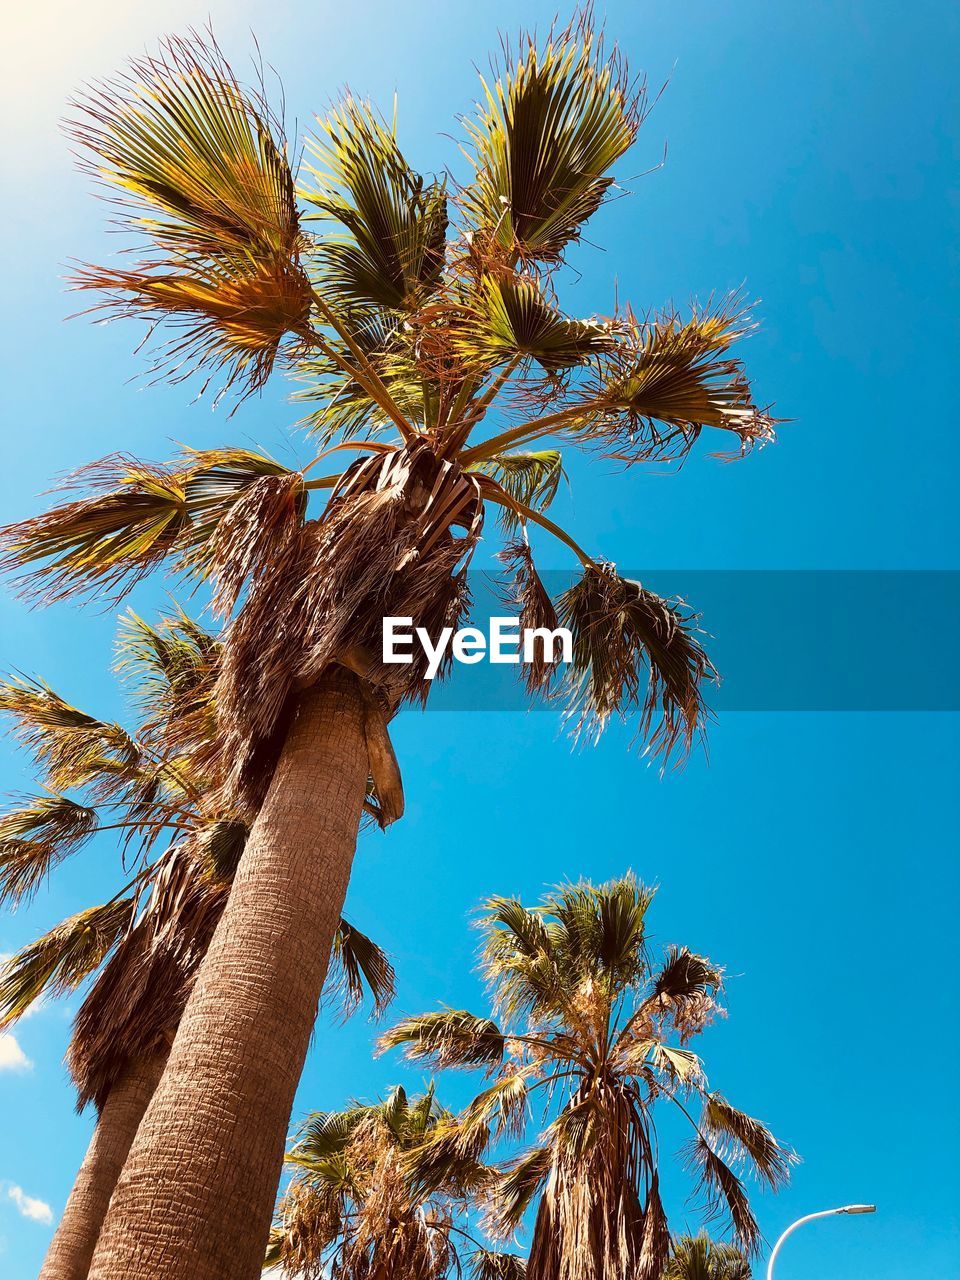 LOW ANGLE VIEW OF PALM TREE AGAINST BLUE SKY